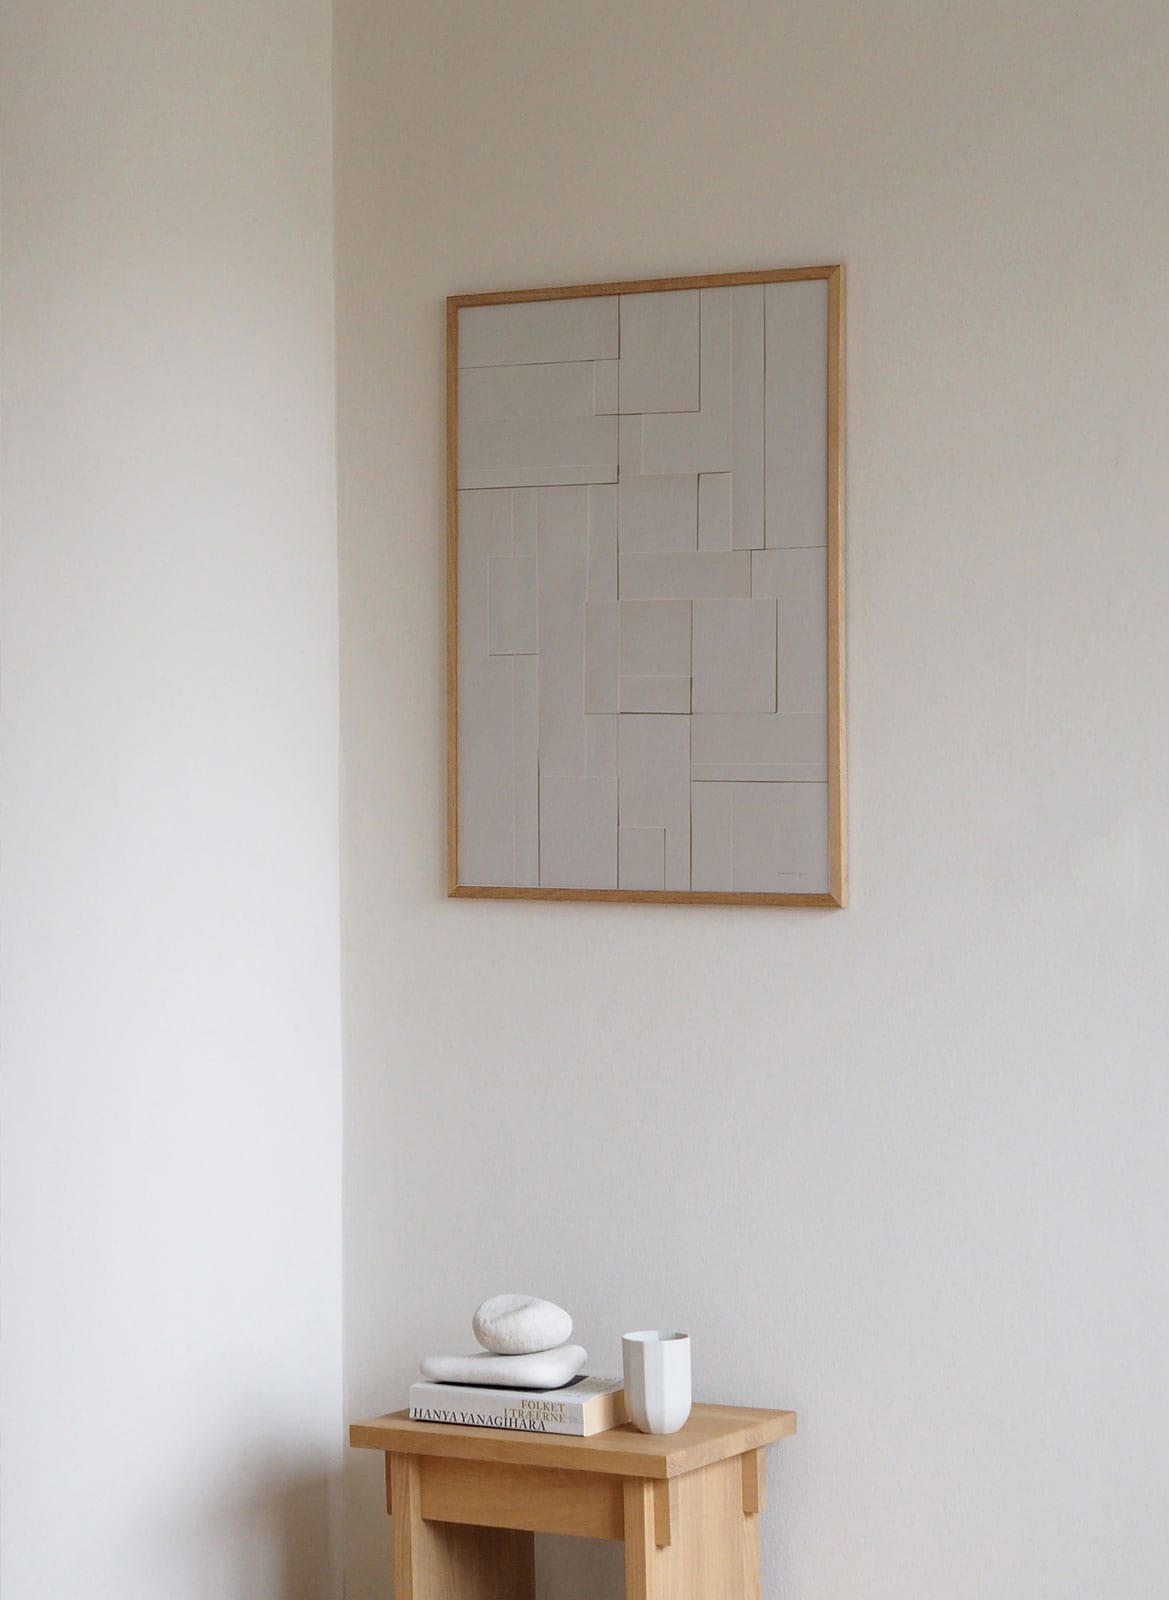 Framed minimalistic poster hanging above table by Atelier Cph